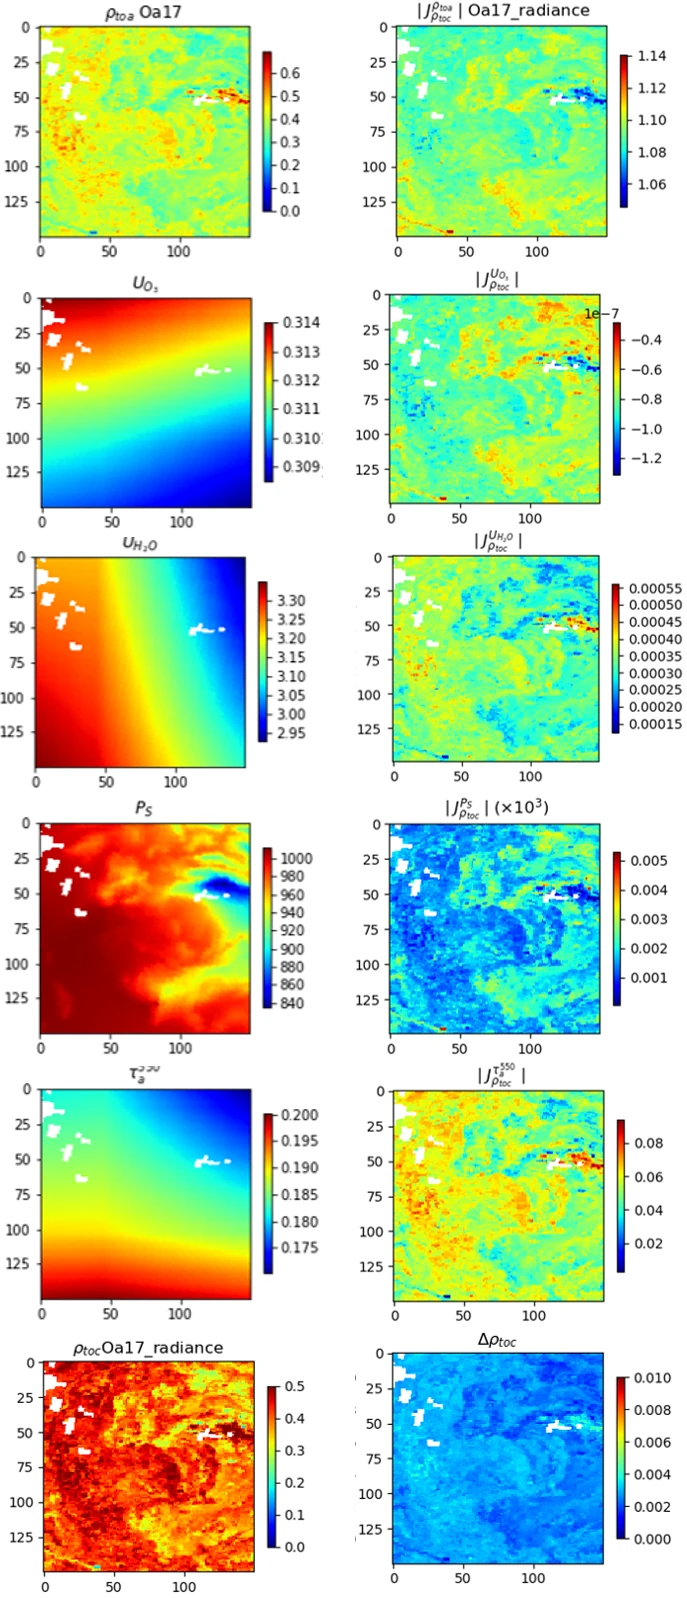 maps of SMAC inputs (TOA reflectance, ozone, water vapour pressure of surface and aerosol optical thickness) and of their corresponding jacobians, map of the resulting TOC reflectance and its uncertainty. Example for OLCI band at 865nm